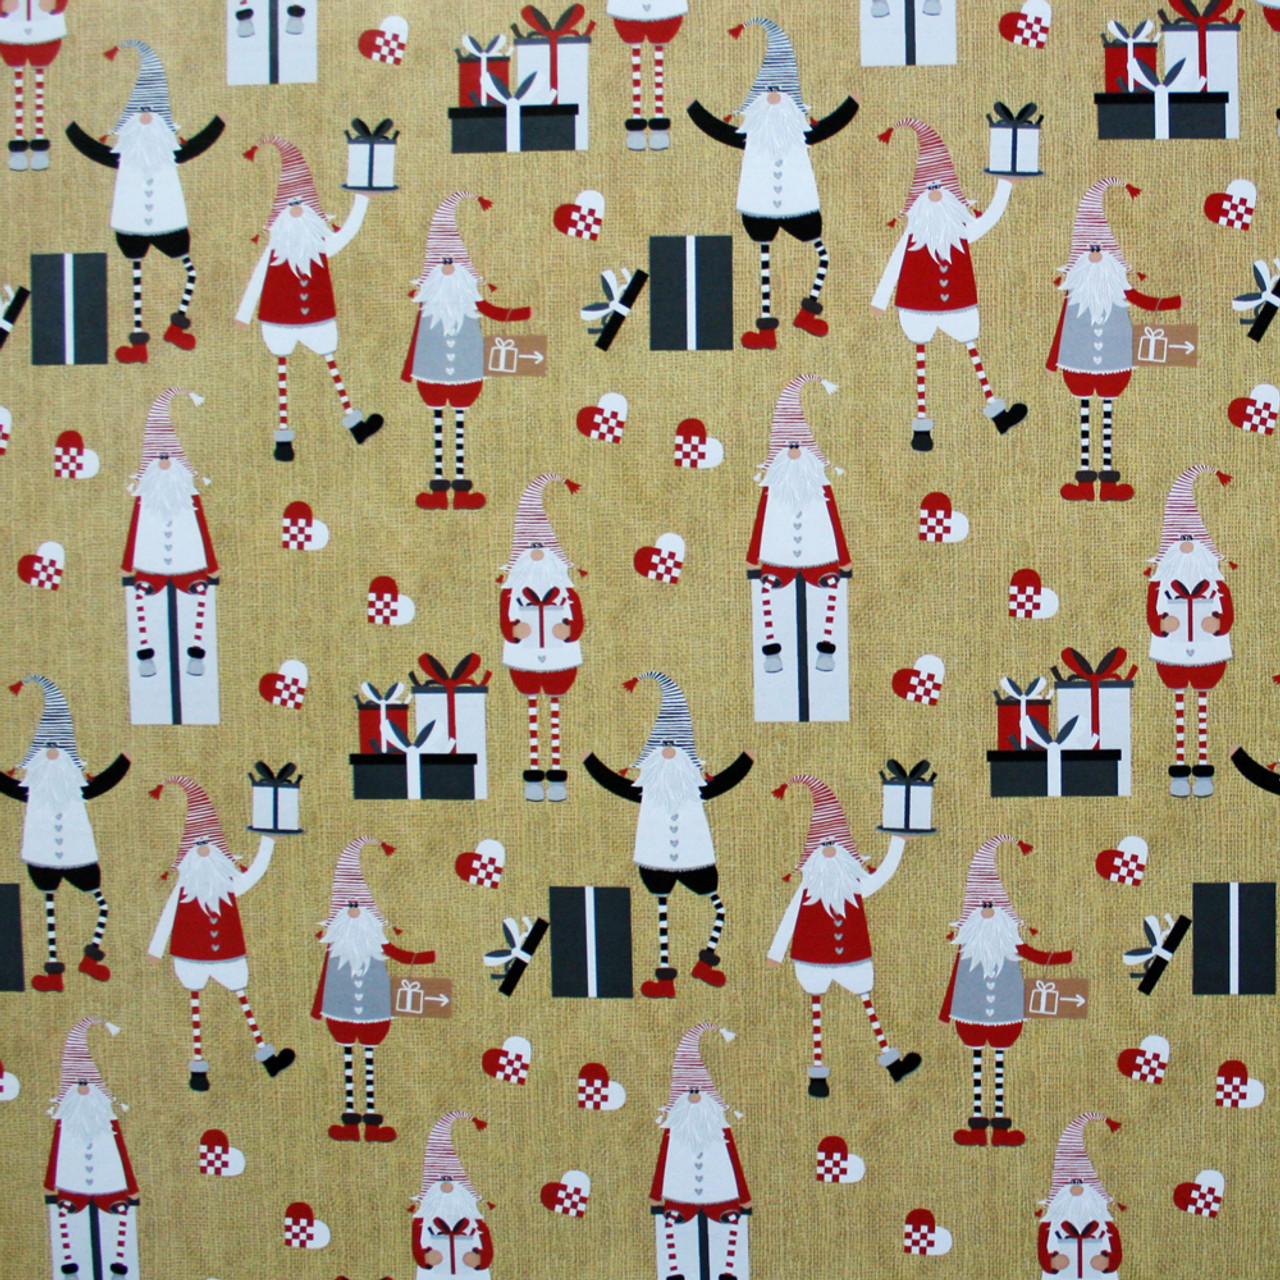 Christmas Wrapping Paper - Skates